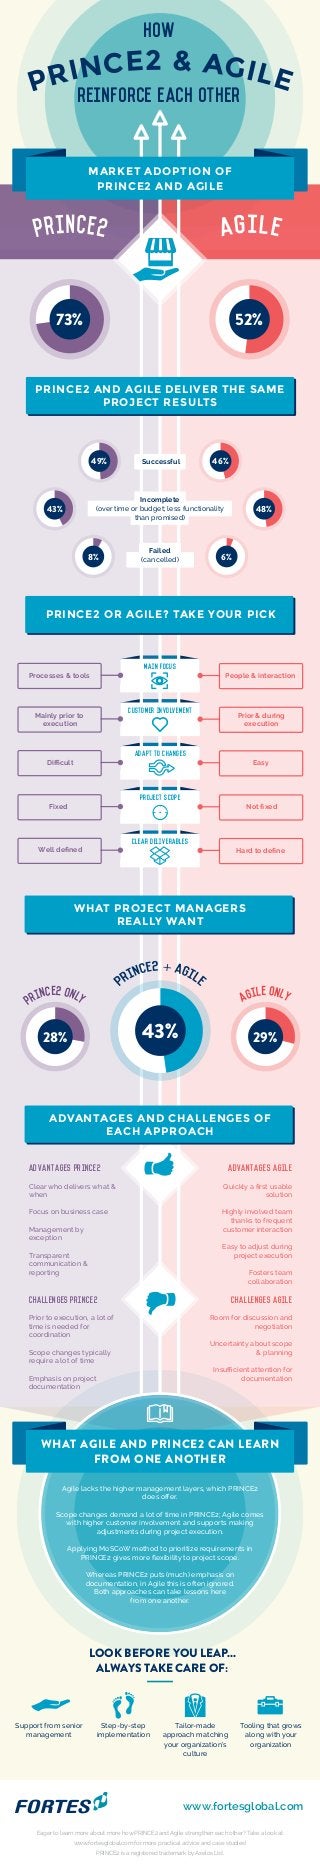 REINFORCE EACH OTHER
MARKET ADOPTION OF
PRINCE2 AND AGILE
WHAT AGILE AND PRINCE2 CAN LEARN
FROM ONE ANOTHER
PRINCE2 AND AGILE DELIVER THE SAME
PROJECT RESULTS
73%
43% 29%28%
52%
PRINCE2 OR AGILE? TAKE YOUR PICK
WHAT PROJECT MANAGERS
REALLY WANT
ADVANTAGES AND CHALLENGES OF
EACH APPROACH
Successful
Incomplete
(over time or budget; less functionality
than promised)
Failed
(cancelled)
43% 48%
49% 46%
8% 6%
Processes & tools
Main focus
People & interaction
Mainly prior to
execution
Customer involvement
Prior & during
execution
Diﬃcult
Adapt to changes
Easy
Fixed
Project scope
Not ﬁxed
Well deﬁned
Clear deliverables
Hard to deﬁne
Advantages PRINCE2
Clear who delivers what &
when
Focus on business case
Management by
exception
Transparent
communication &
reporting
Challenges PRINCE2
Prior to execution, a lot of
time is needed for
coordination
Scope changes typically
require a lot of time
Emphasis on project
documentation
Advantages agile
Quickly a ﬁrst usable
solution
Highly involved team
thanks to frequent
customer interaction
Easy to adjust during
project execution
Fosters team
collaboration
Challenges agile
Room for discussion and
negotiation
Uncertainty about scope
& planning
Insuﬃcient attention for
documentation
Agile lacks the higher management layers, which PRINCE2
does oﬀer.
Scope changes demand a lot of time in PRINCE2; Agile comes
with higher customer involvement and supports making
adjustments during project execution.
Applying MoSCoW method to prioritize requirements in
PRINCE2 gives more ﬂexibility to project scope.
Whereas PRINCE2 puts (much) emphasis on
documentation, in Agile this is often ignored.
Both approaches can take lessons here
from one another.
LOOK BEFORE YOU LEAP...
ALWAYS TAKE CARE OF:
www.fortesglobal.com
Support from senior
management
Step-by-step
implementation
Eager to learn more about more how PRINCE2 and Agile strengthen each other? Take a look at
www.fortesglobal.com for more practical advice and case studies!
PRINCE2 is a registered trademark by Axelos Ltd.
Tailor-made
approach matching
your organization’s
culture
Tooling that grows
along with your
organization
PRINCE2 only Agile only
PRINCE2 & AGILE
HOW
 